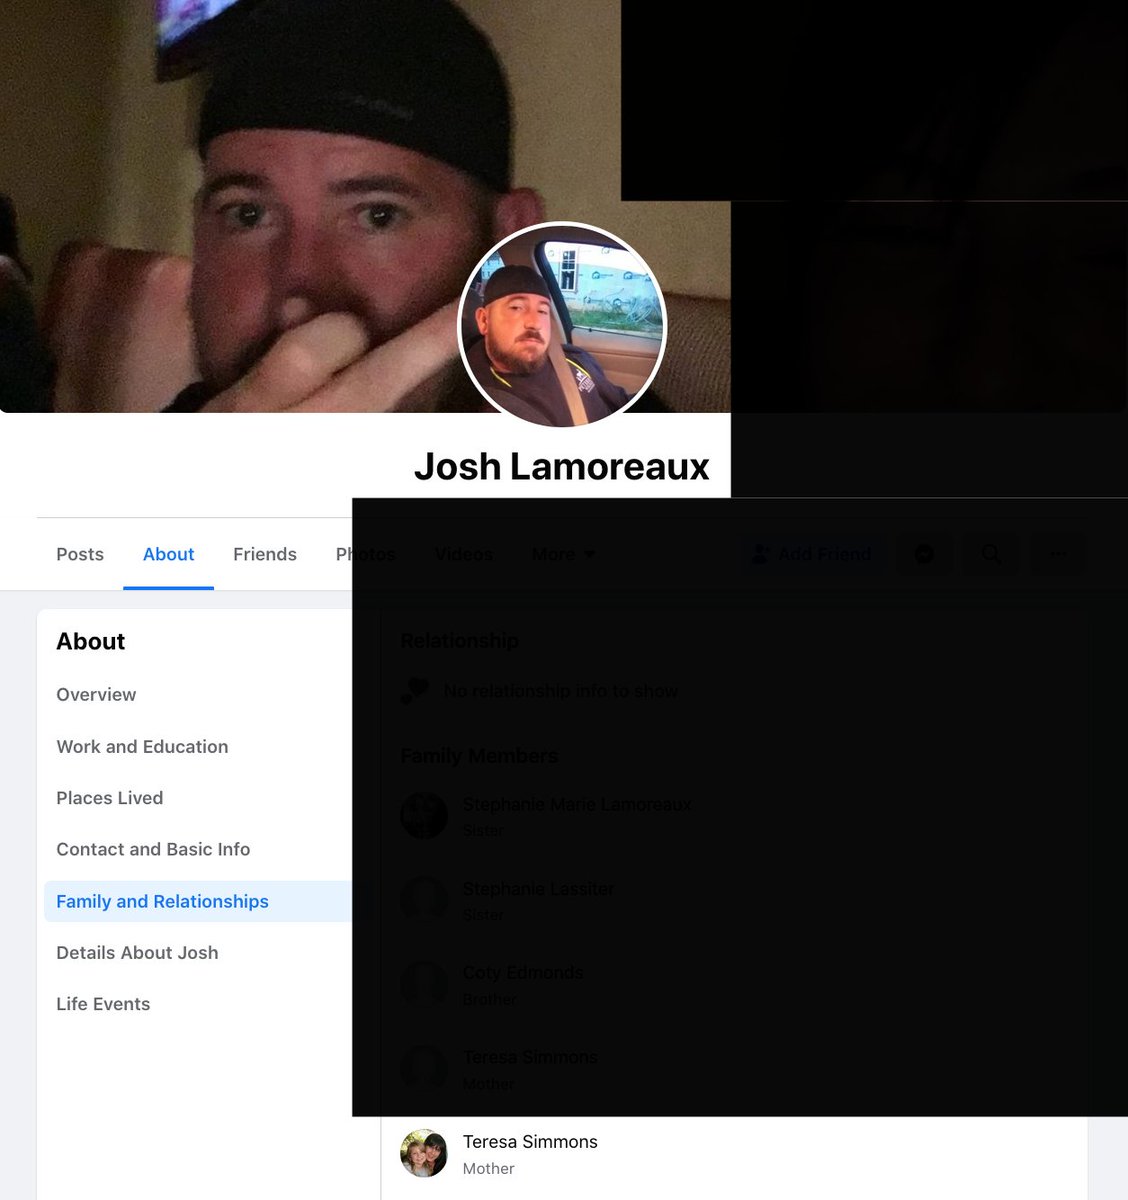 Josh Lamoreaux is allegedly a self-employed grader in Alamance Co NC when he’s not roaming the streets w/ Proud Boys hoping to kill and/or maim ppl in a pandemic.His mother posted the Telegraph vid of him doing the assault, noting his clothing on her FB timeline.